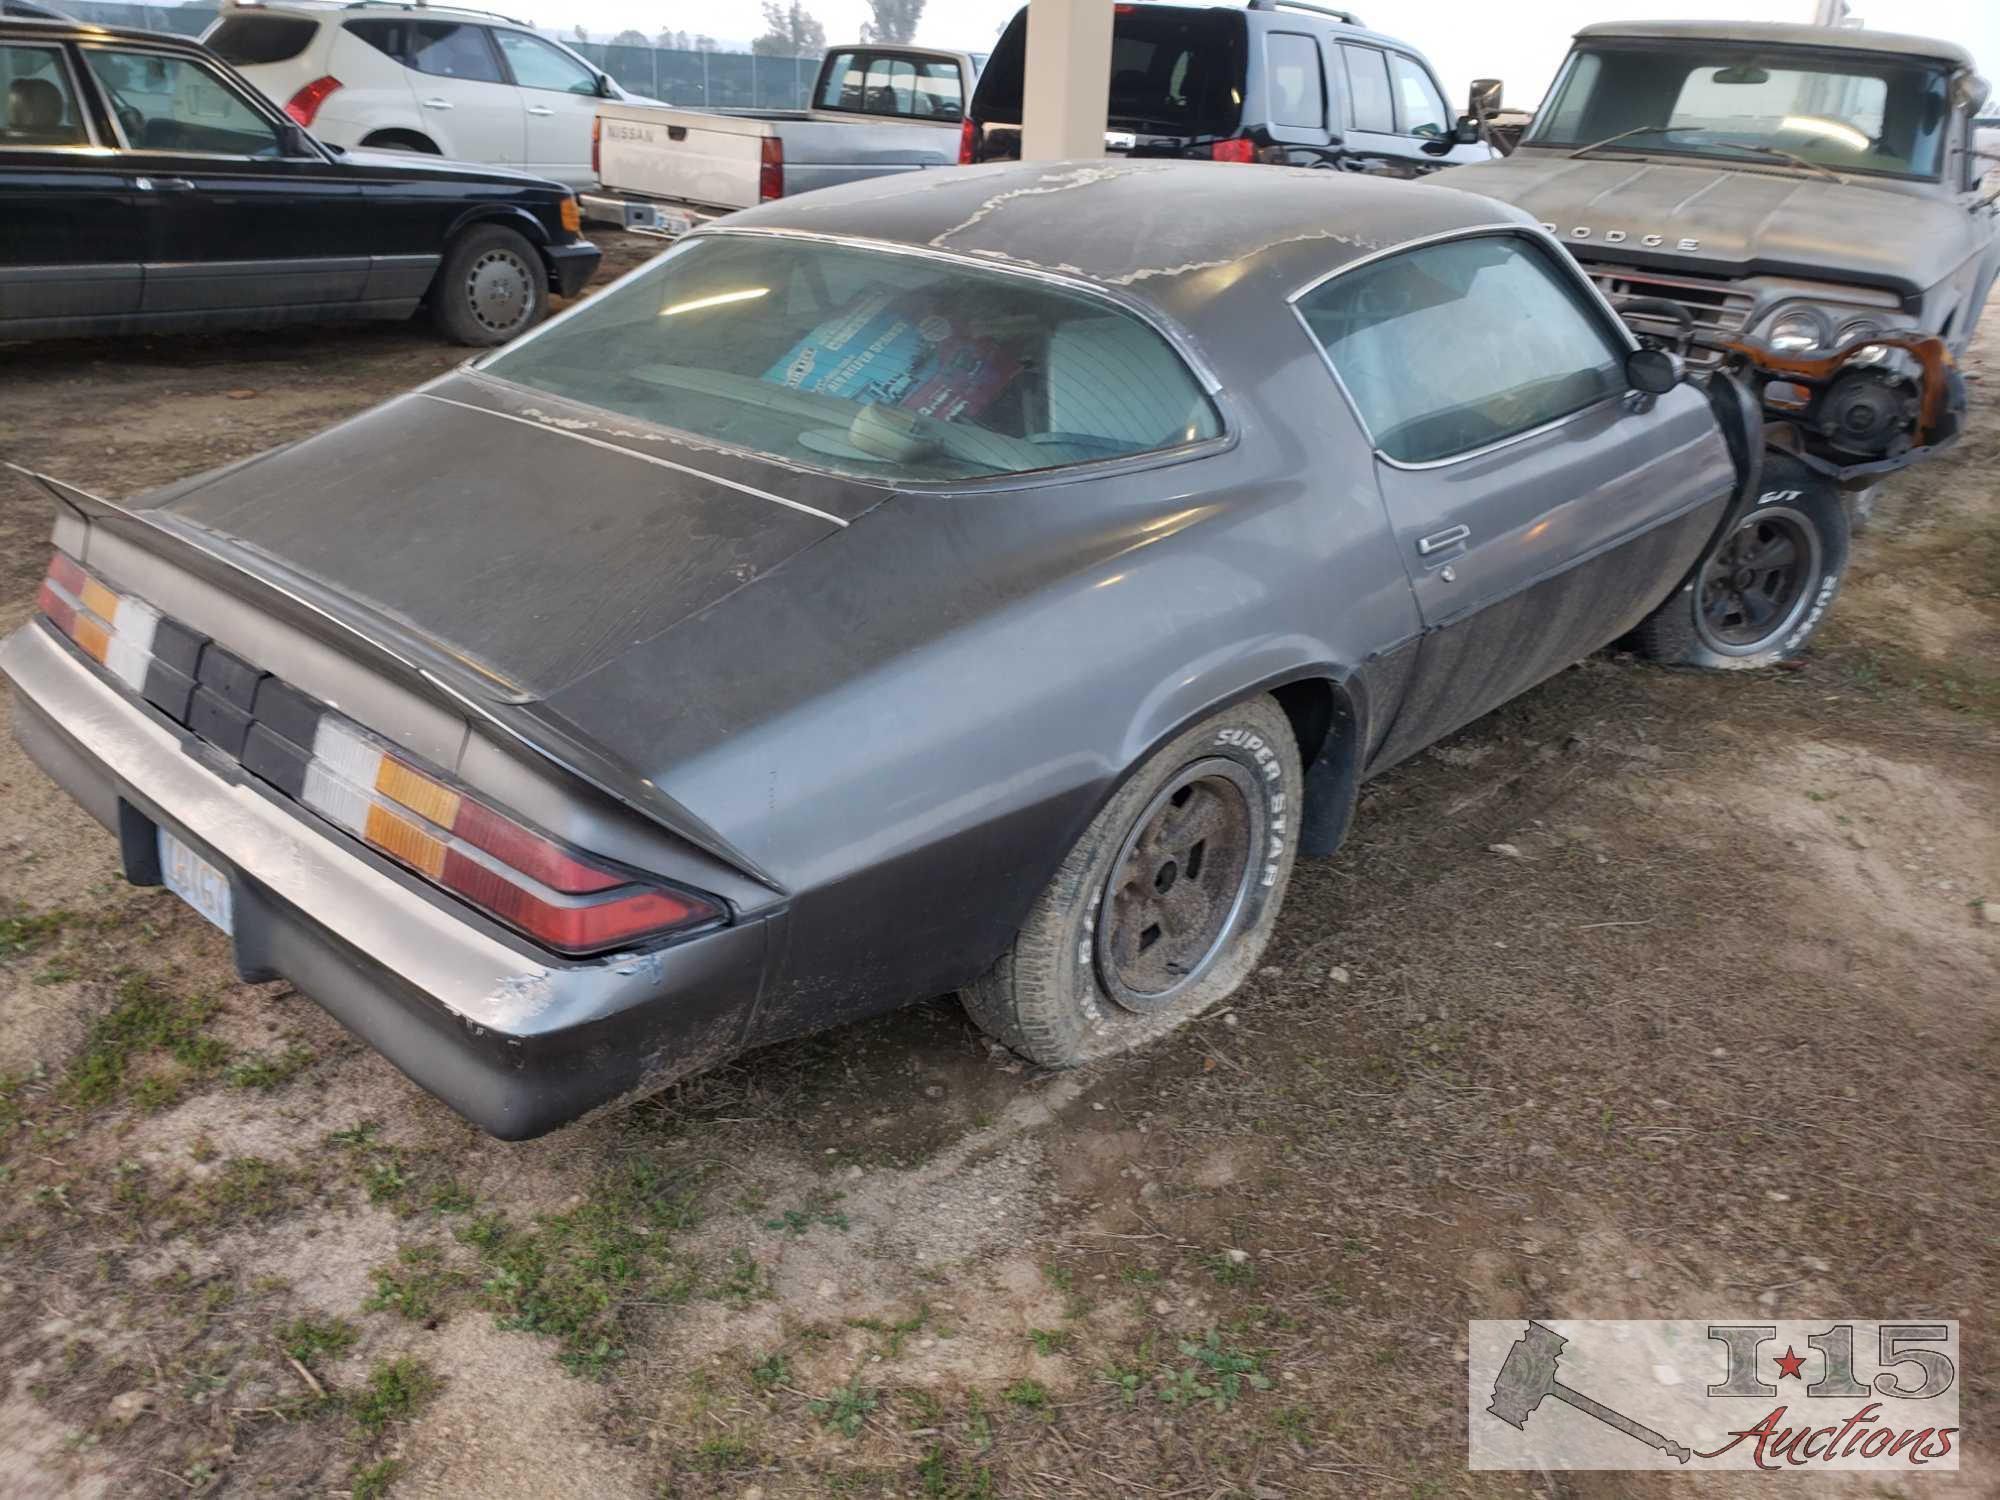 1981 Chevrolet Camaro with miscellaneous parts including hood, fenders, transmission, Front Grill,